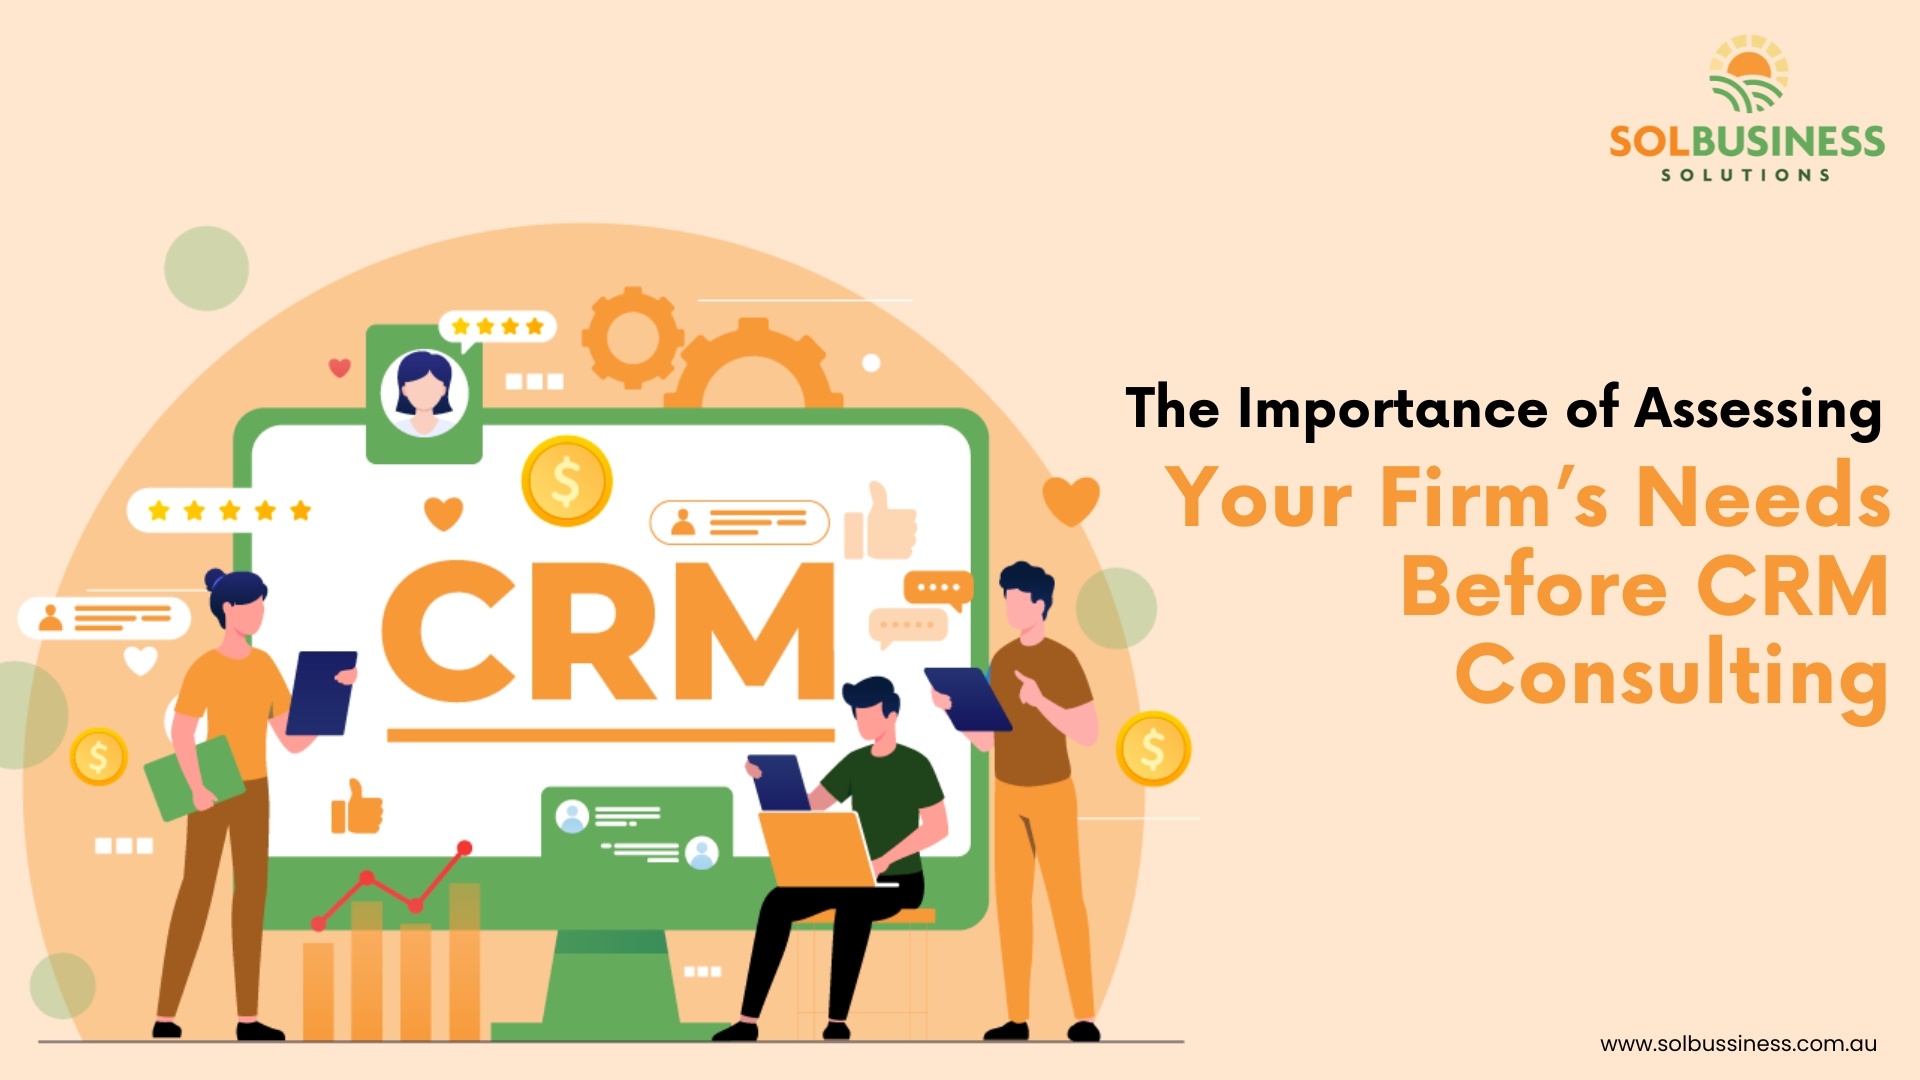 The Importance of Assessing Your Firm’s Needs Before CRM Consulting